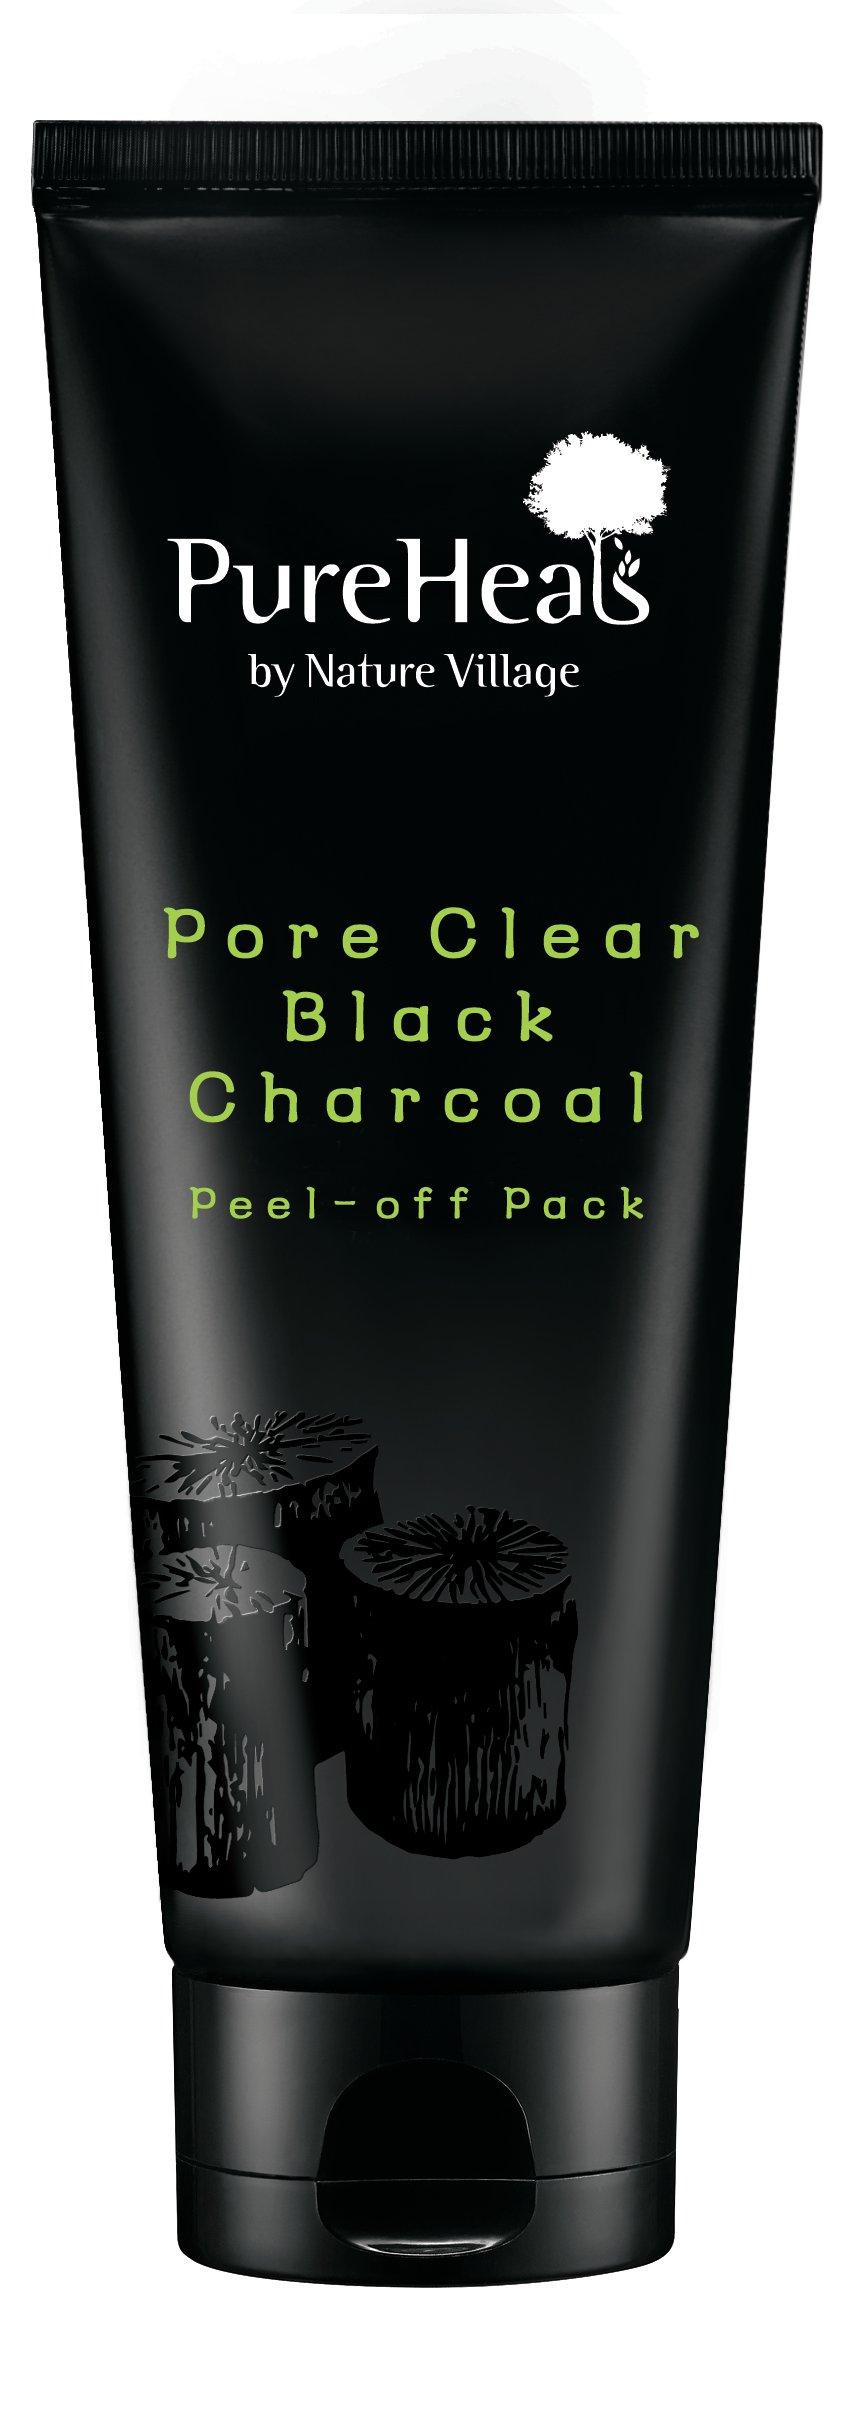 Image of PureHeals Pore Clear Black Charcoal Peel-off Pack - 100 ml